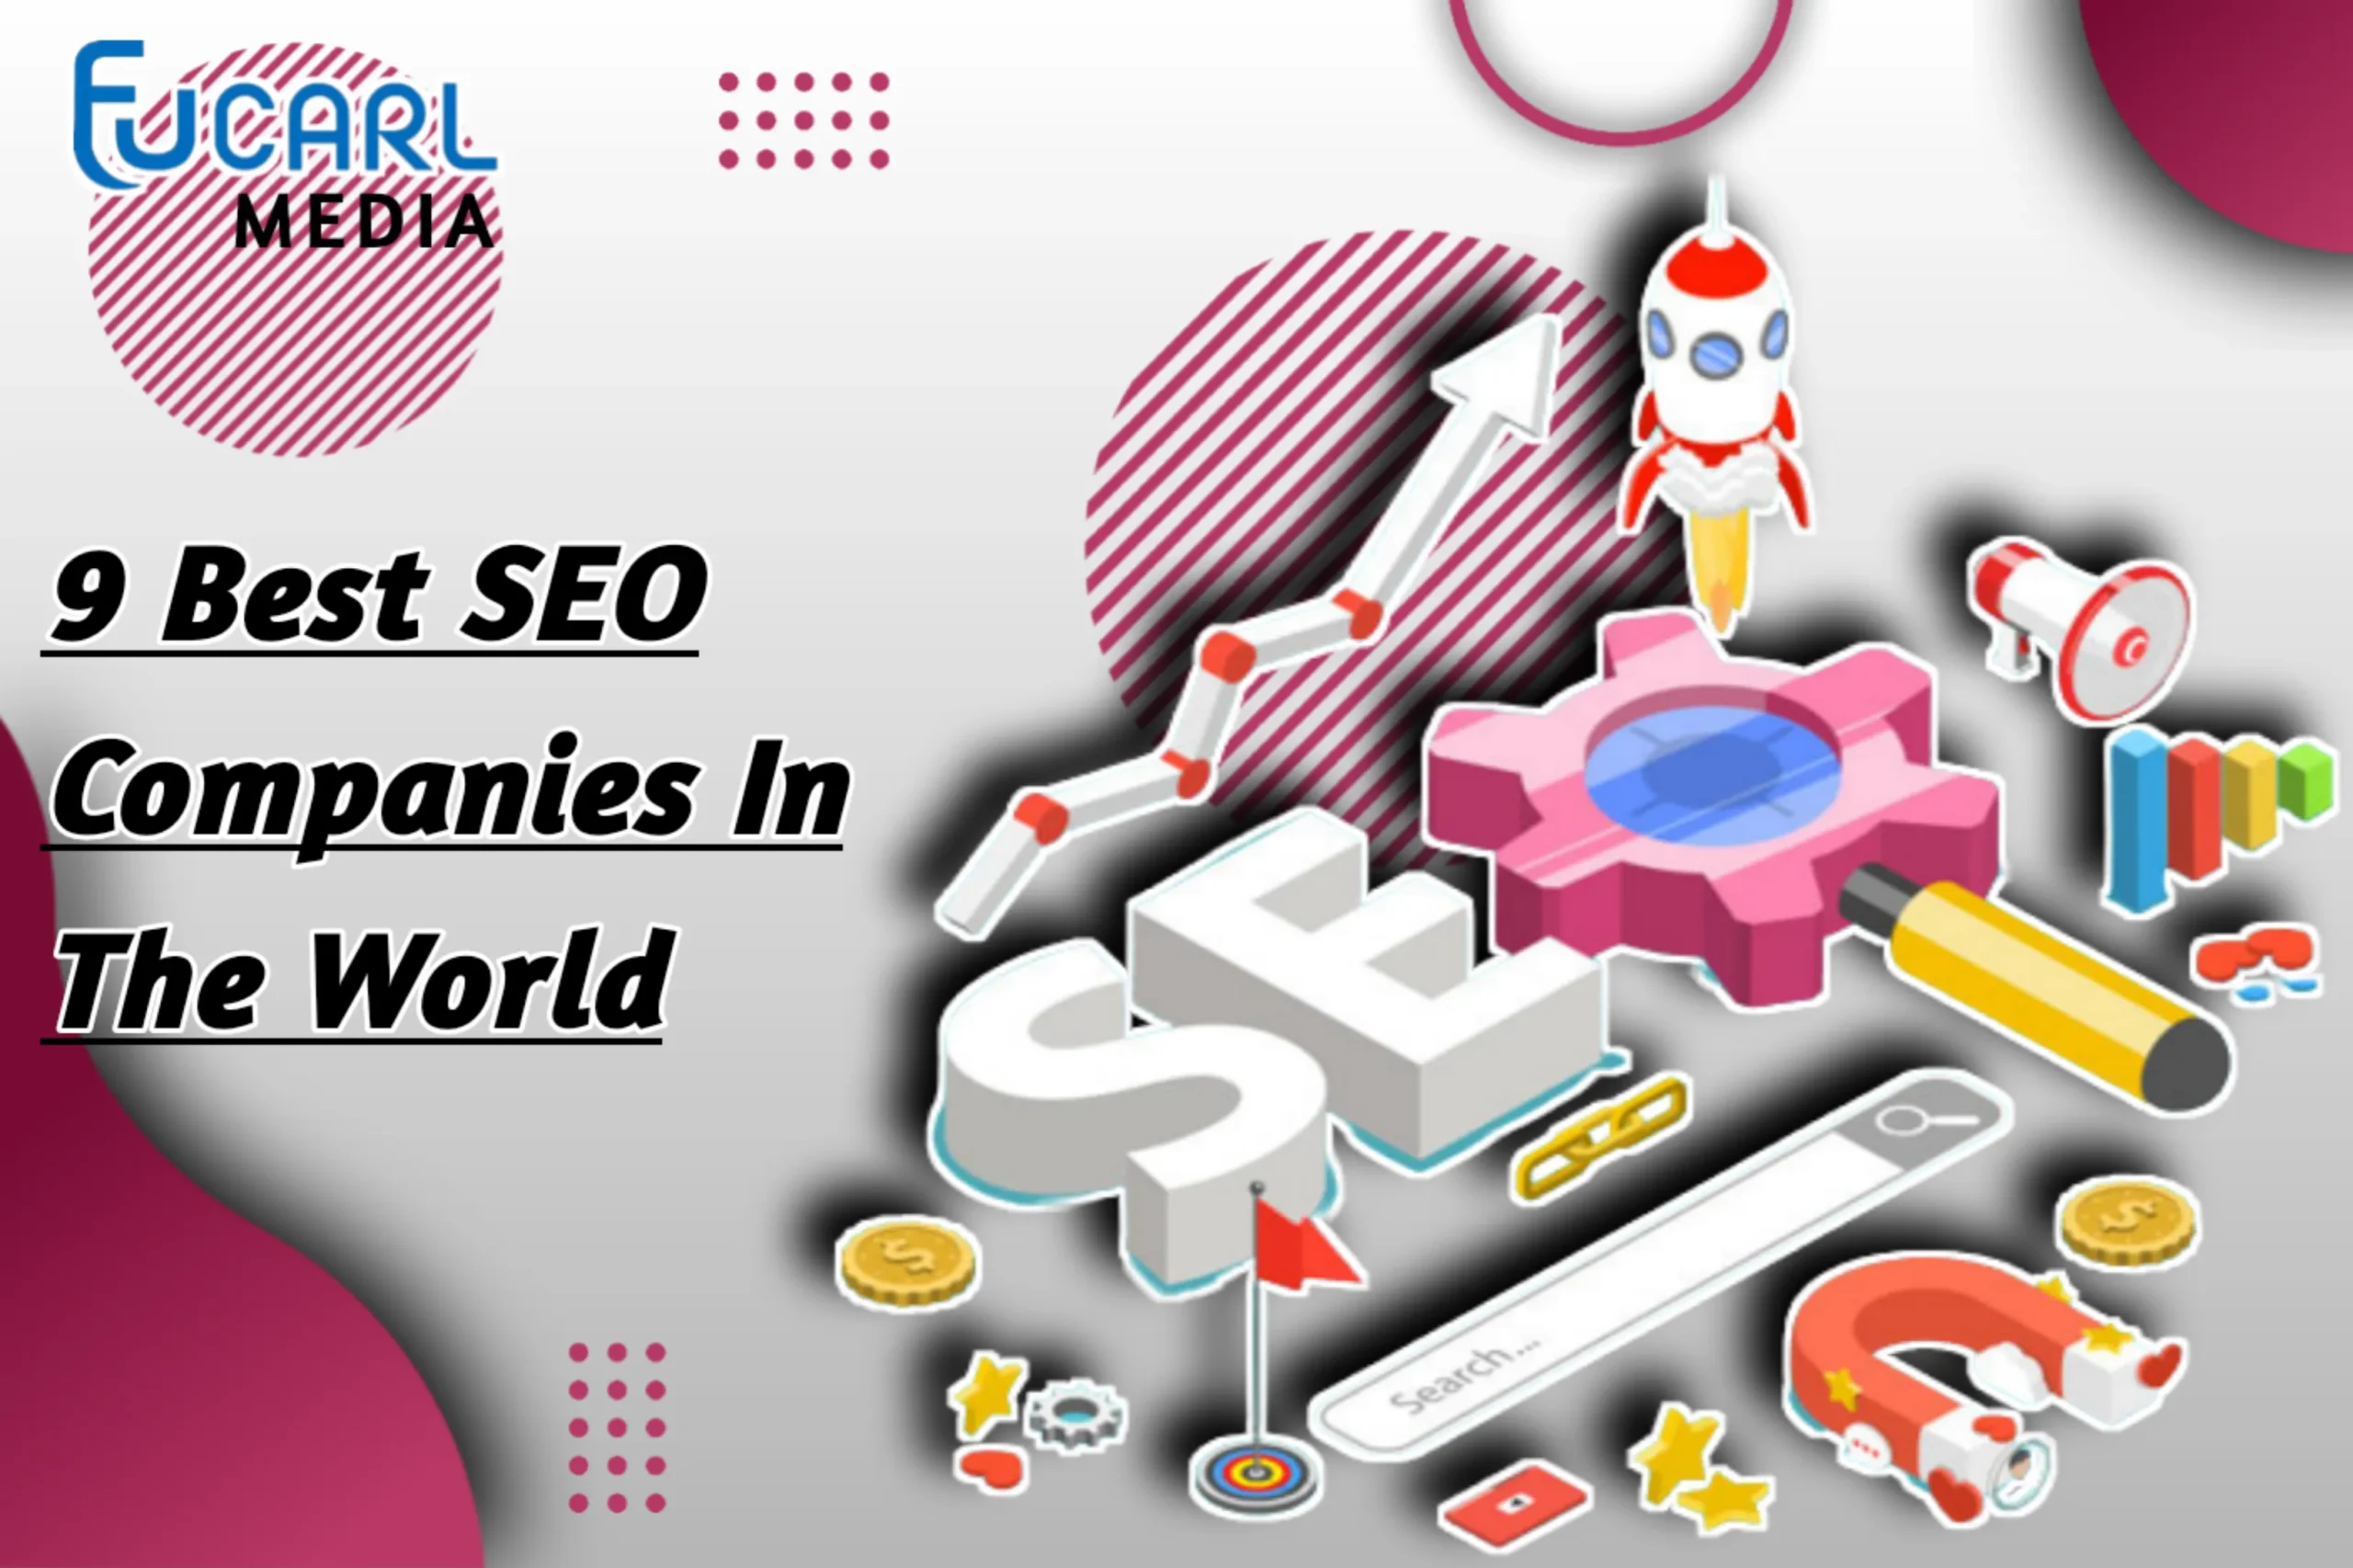 The 9 Best SEO Companies In The World Revealed!